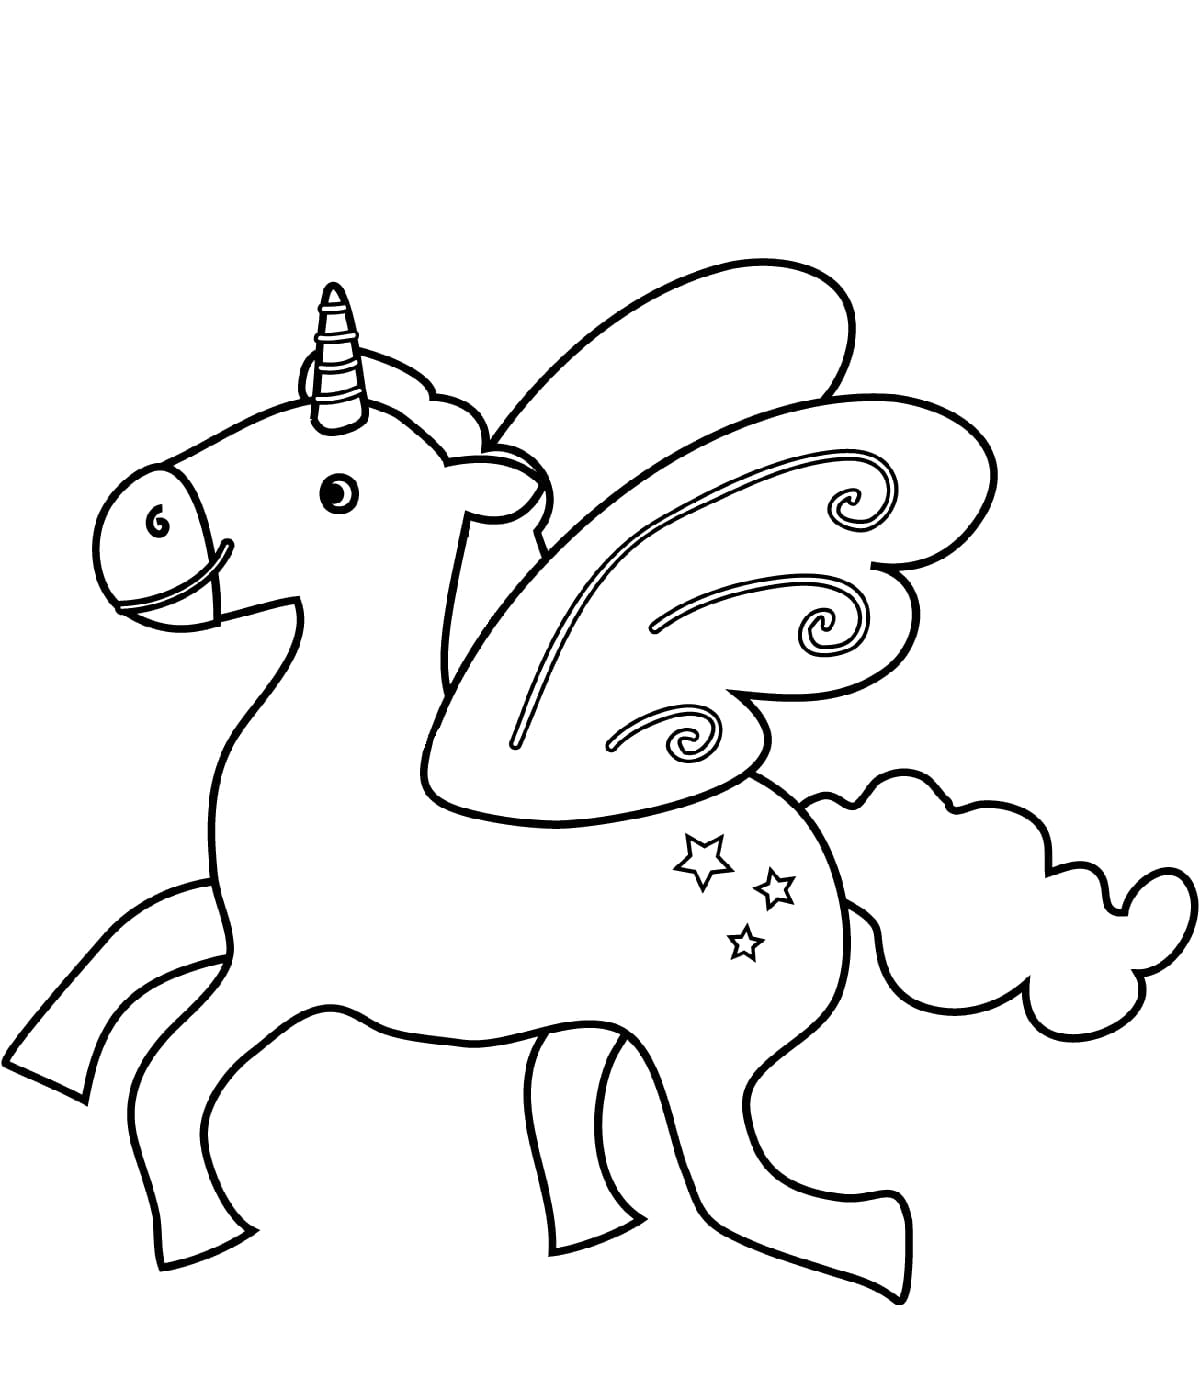 64 Collection Unicorn Elephant Coloring Pages Best